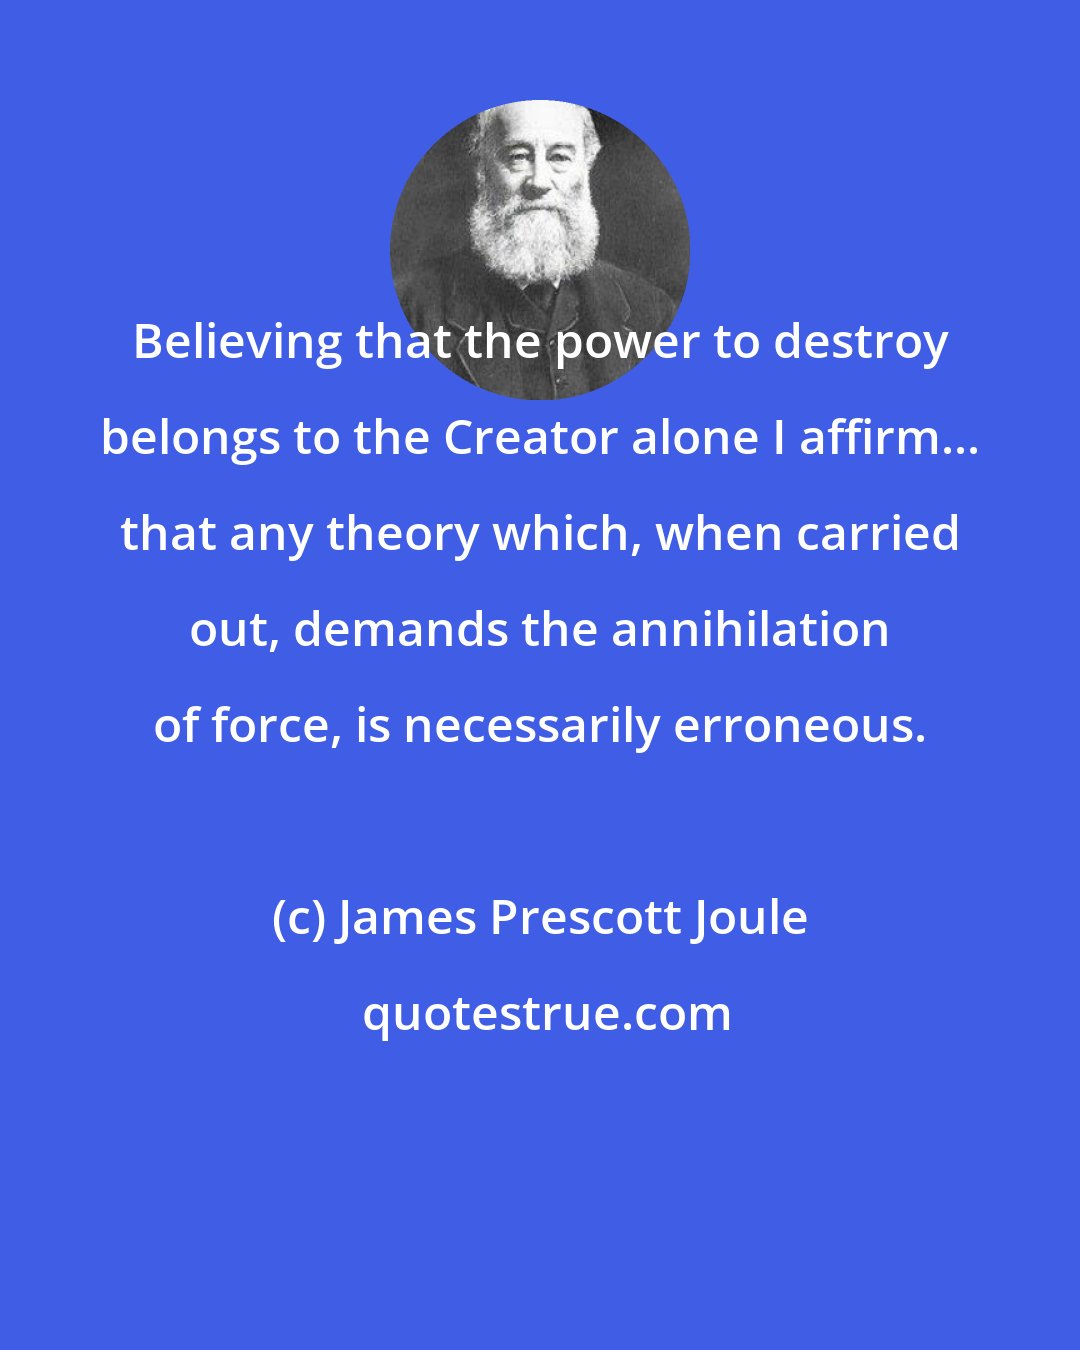 James Prescott Joule: Believing that the power to destroy belongs to the Creator alone I affirm... that any theory which, when carried out, demands the annihilation of force, is necessarily erroneous.